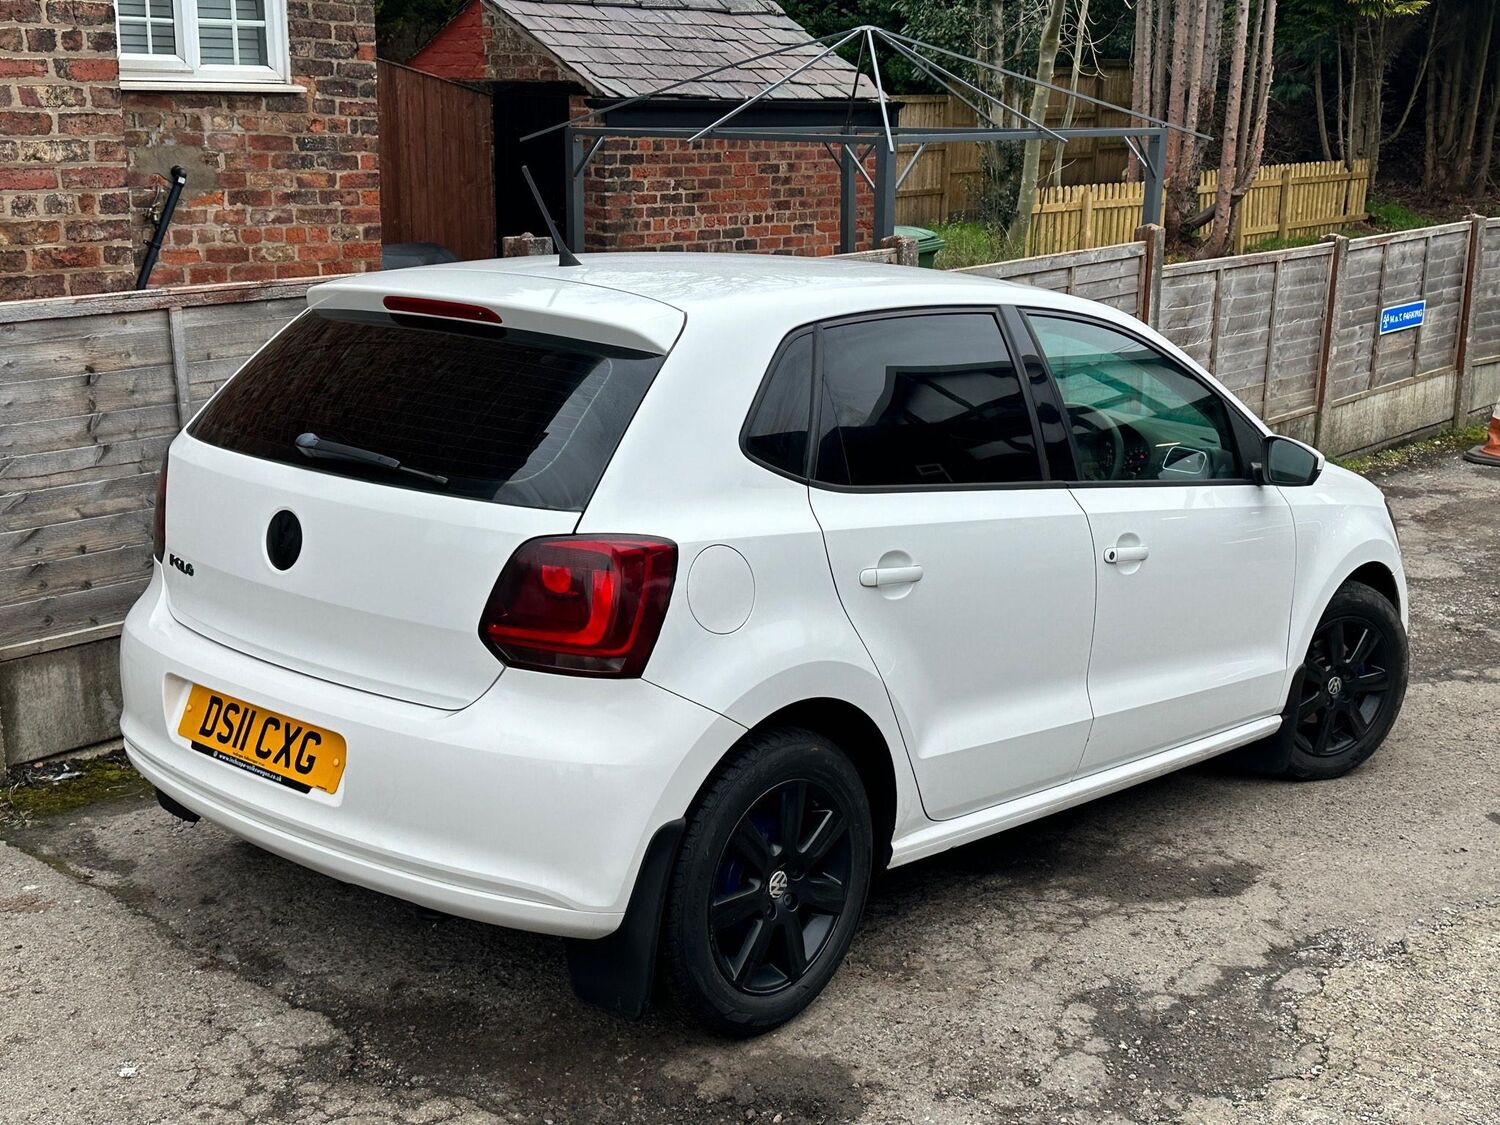 Used VOLKSWAGEN POLO 2011 White in Altrincham, Cheshire | A P Hynes